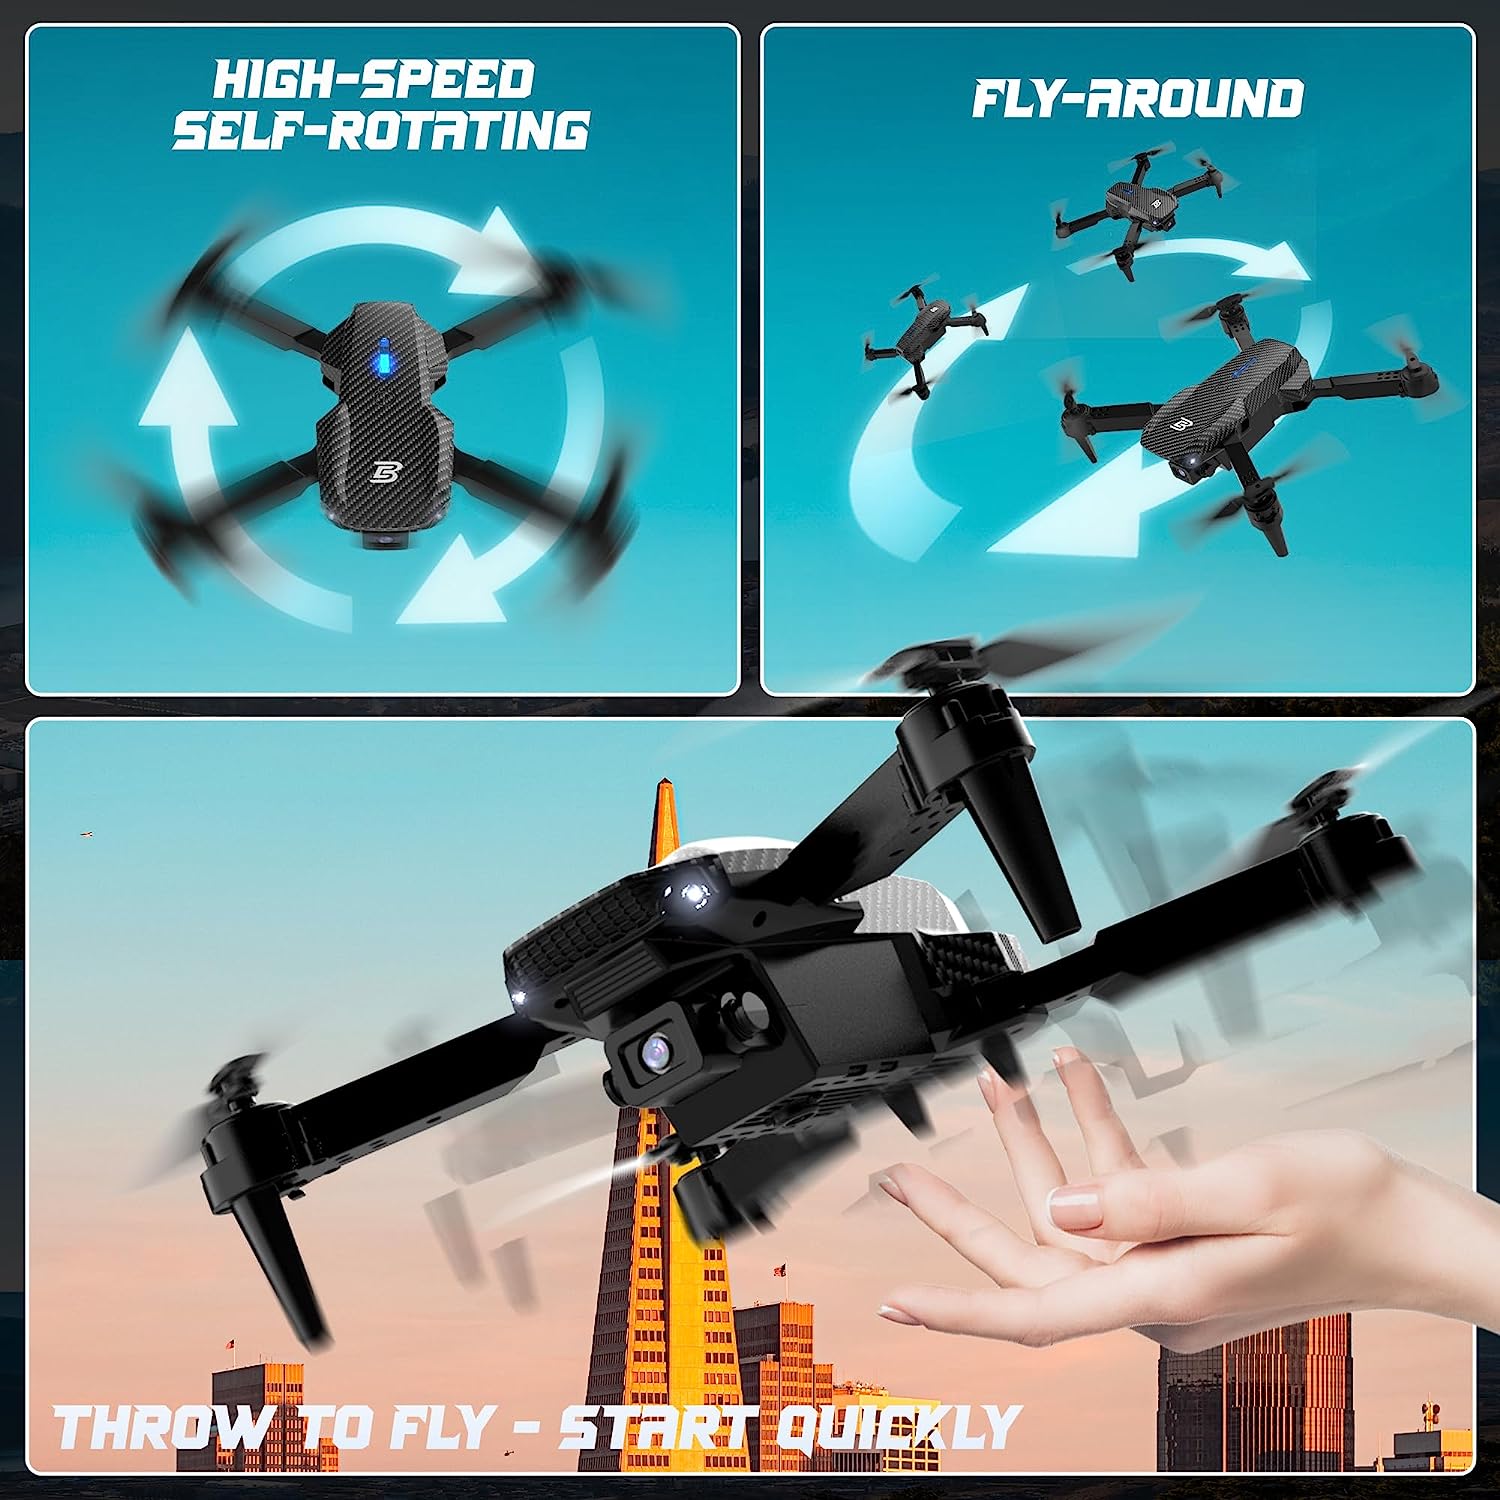 BEZGAR BD101 Drone with 1080P Camera for Adults and Kids - Foldable FPV Remote Control Drone with Gestures Selfie, Auto Hover, One Key Start/Land, 3D Flips, 2 Batteries, Toys Gifts for Boys Girls